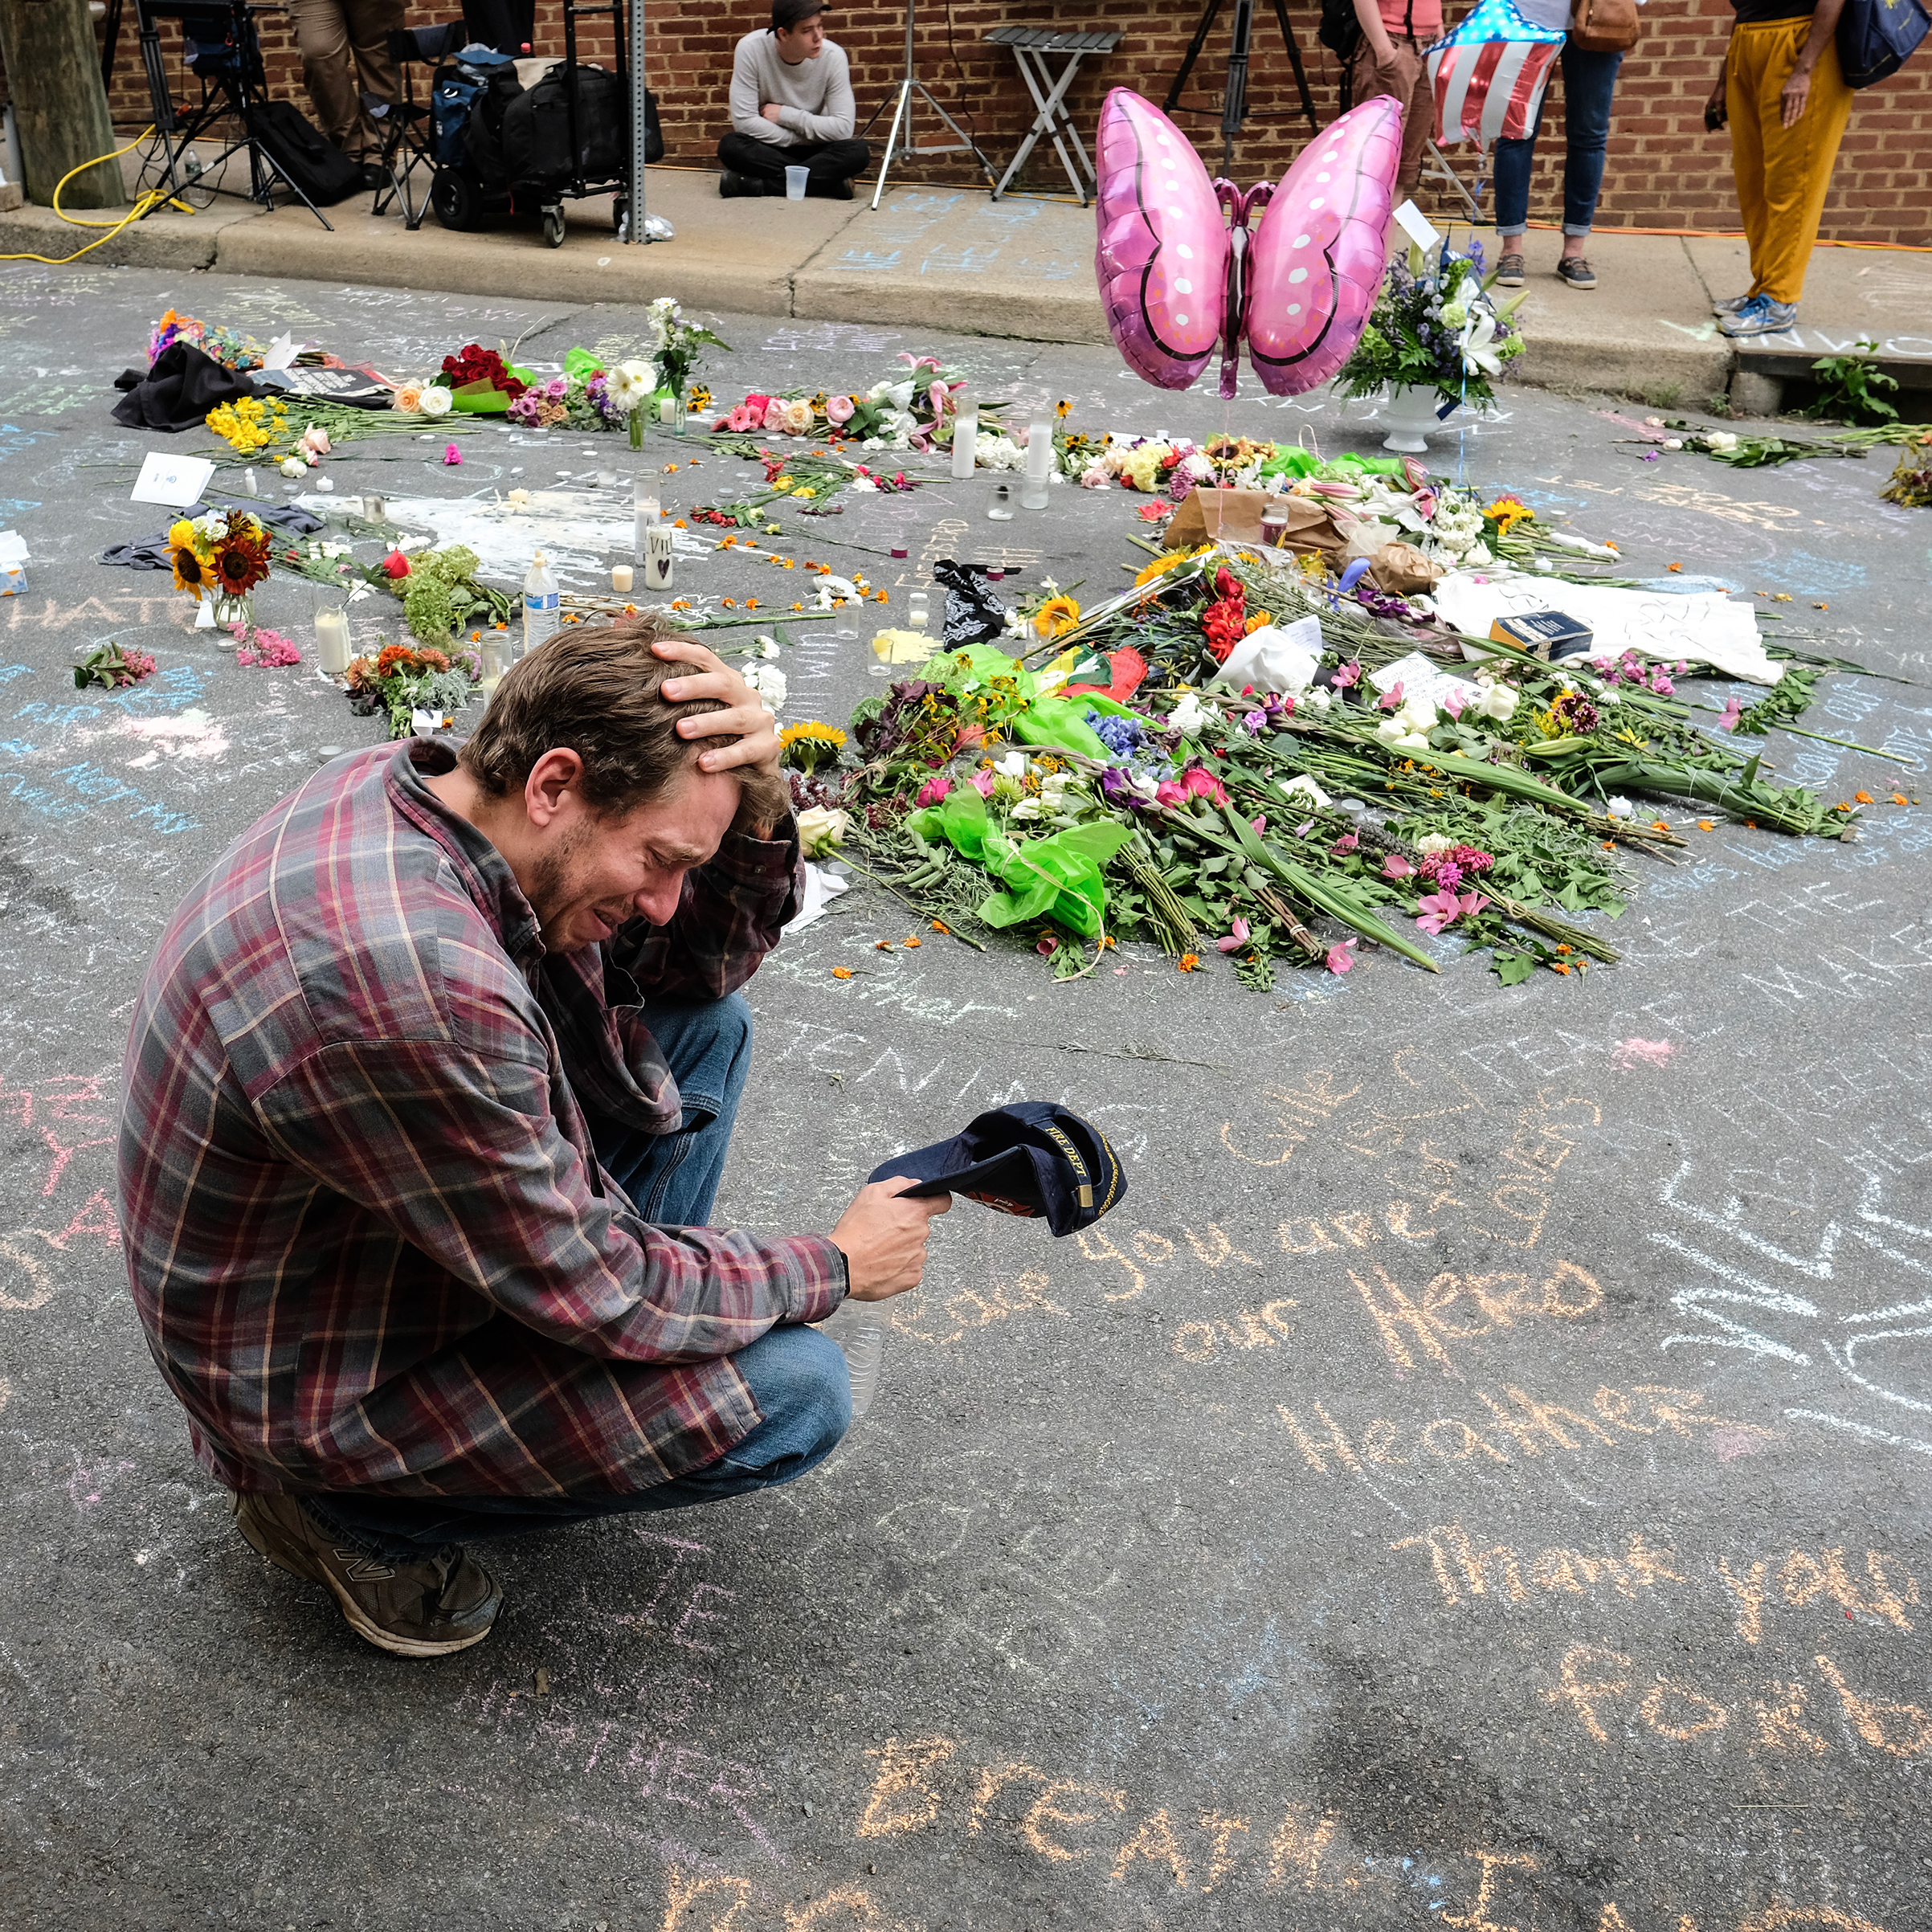 Jake Westley Anderson visits the spot where Heather Heyer died on Aug. 12. (Ruddy Roye for TIME)